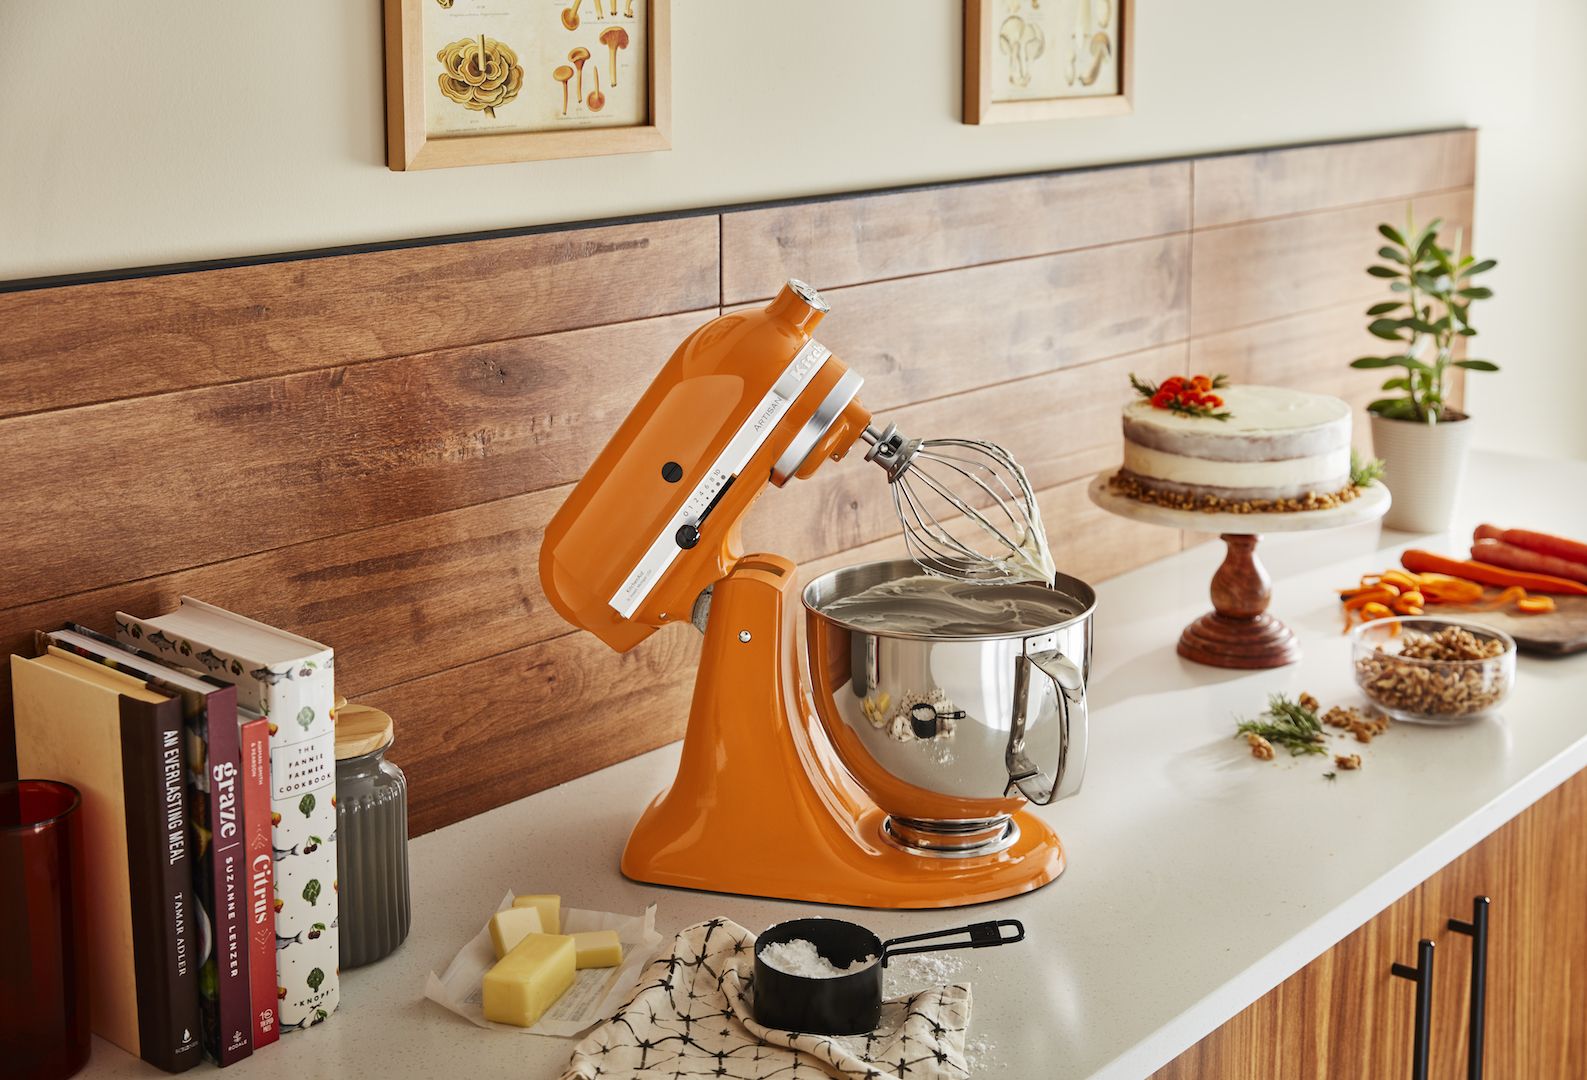 of Shop KitchenAid - New Mixer in 2021 the Honey KitchenAid\'s Stand Color Year